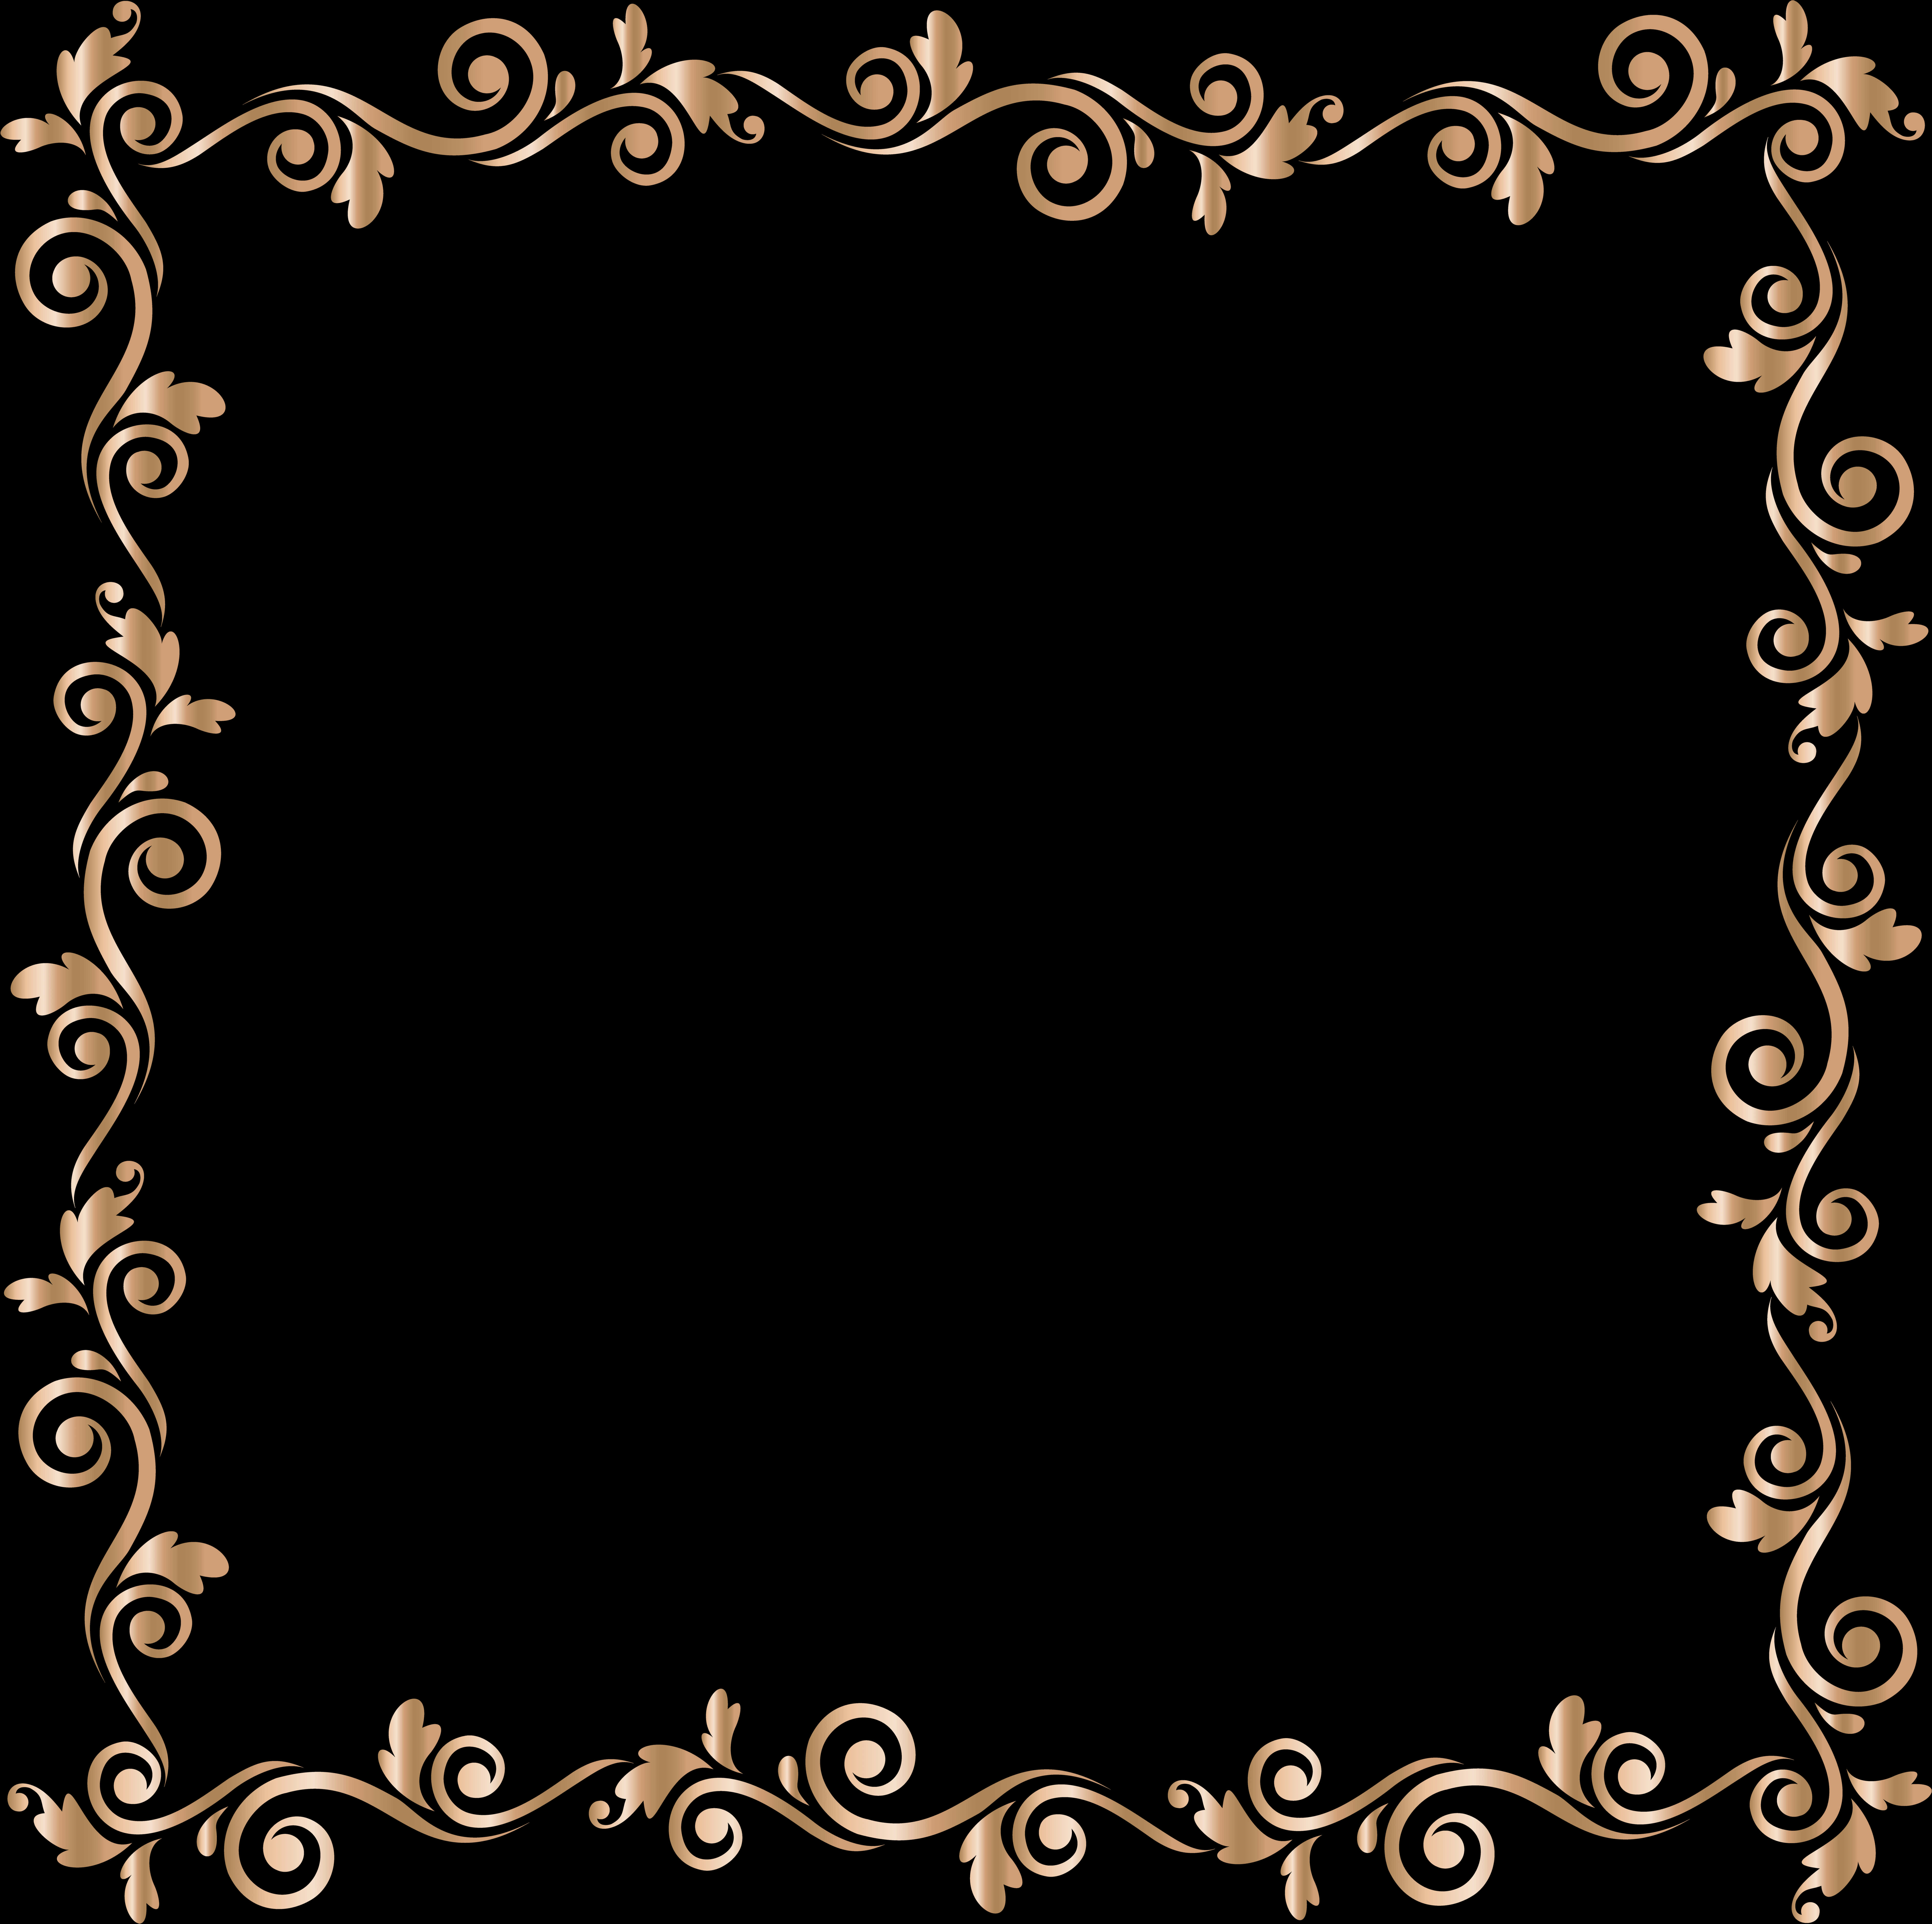 A Gold Frame With Swirls On A Black Background